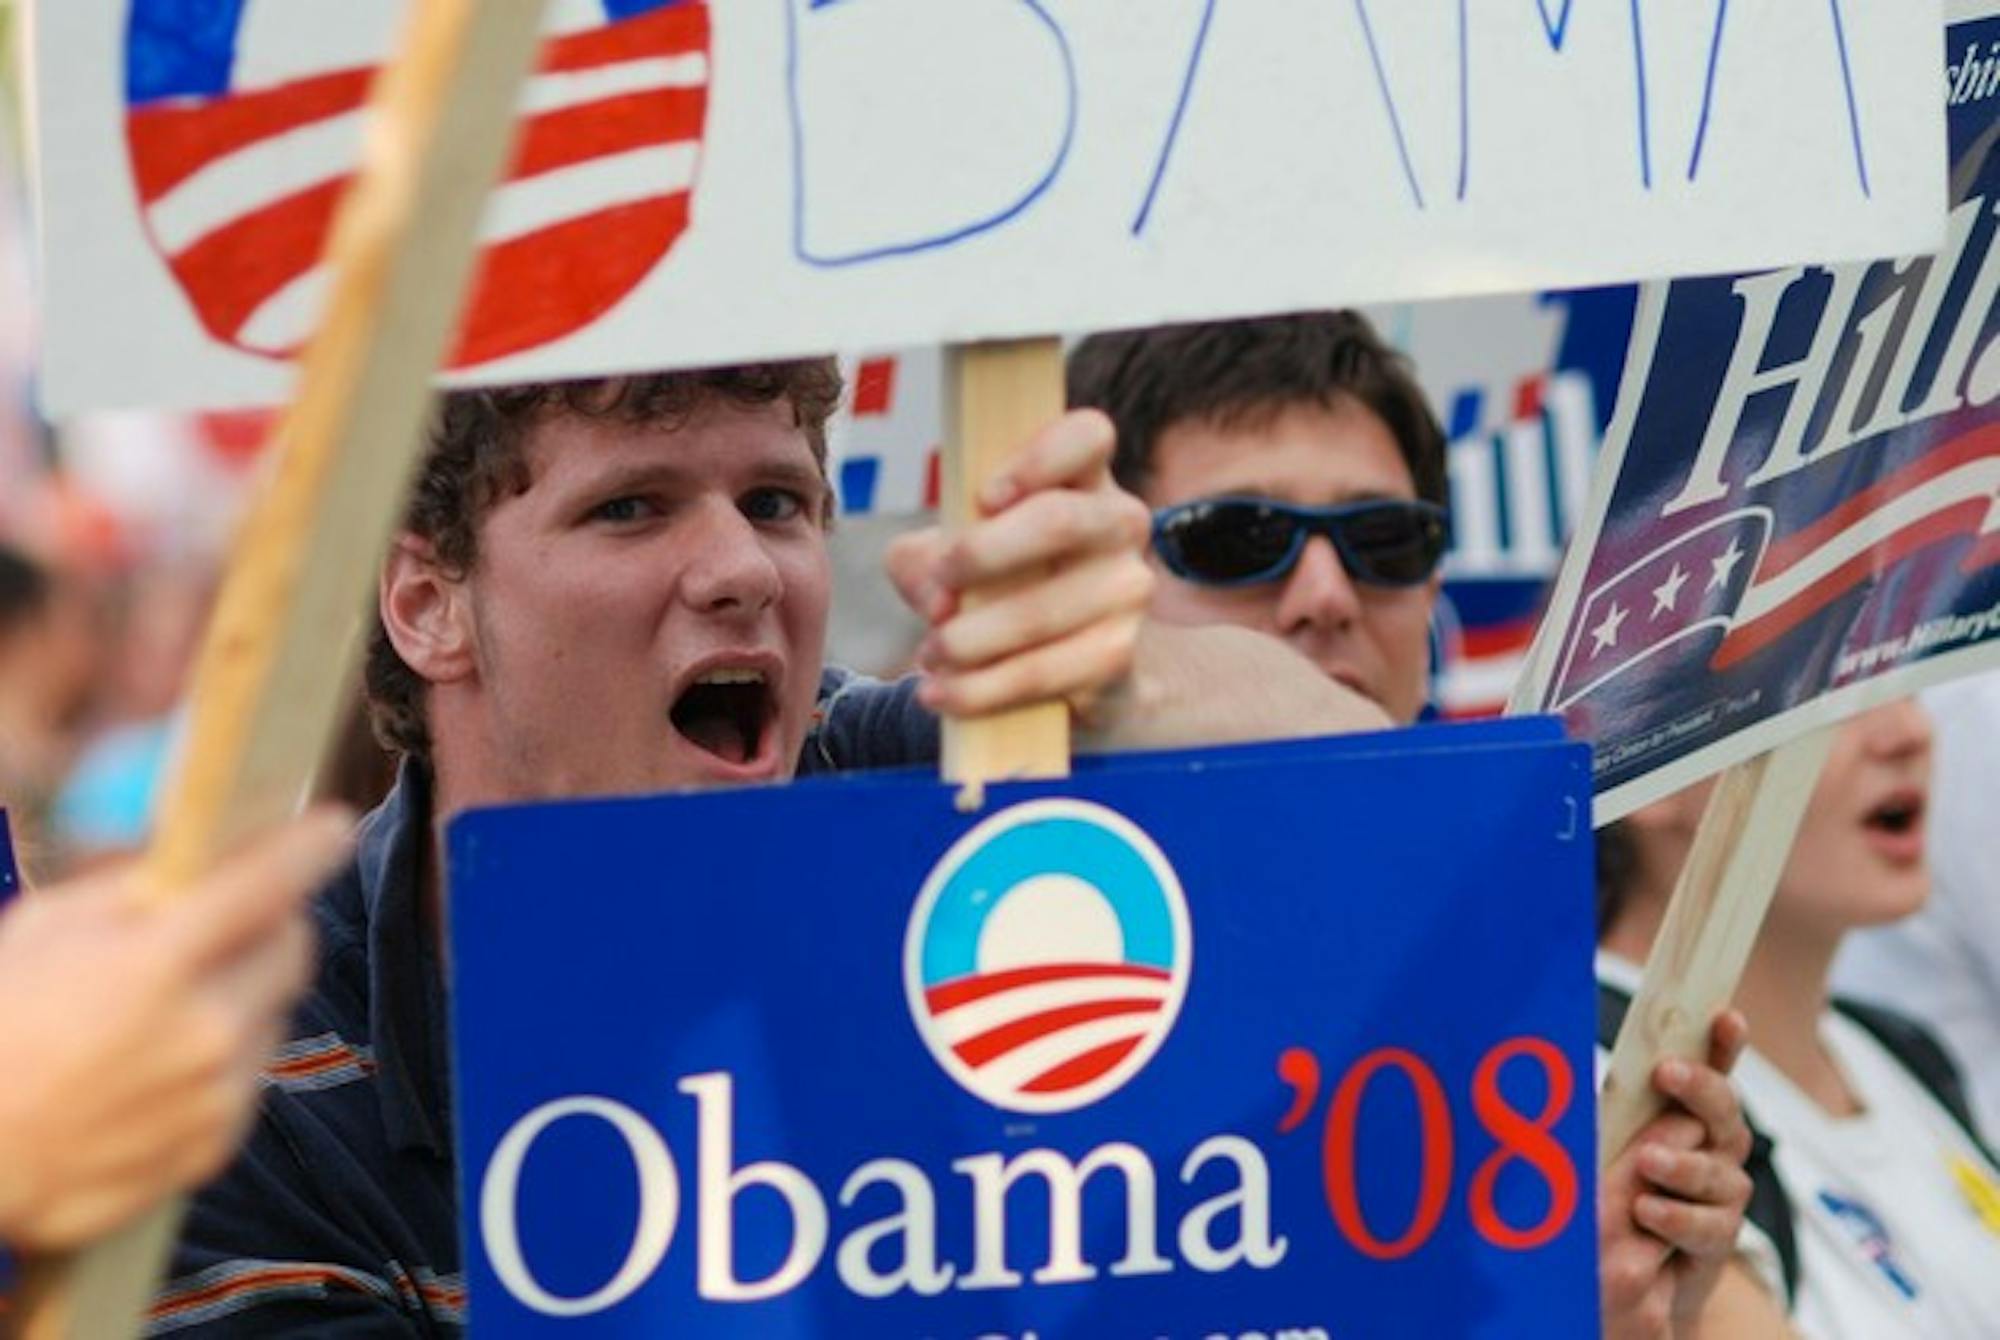 Nickolas Barber '10 cheers for Sen. Barack Obama, D-Ill.,as campaigns flock to Dartmouth before primaries.